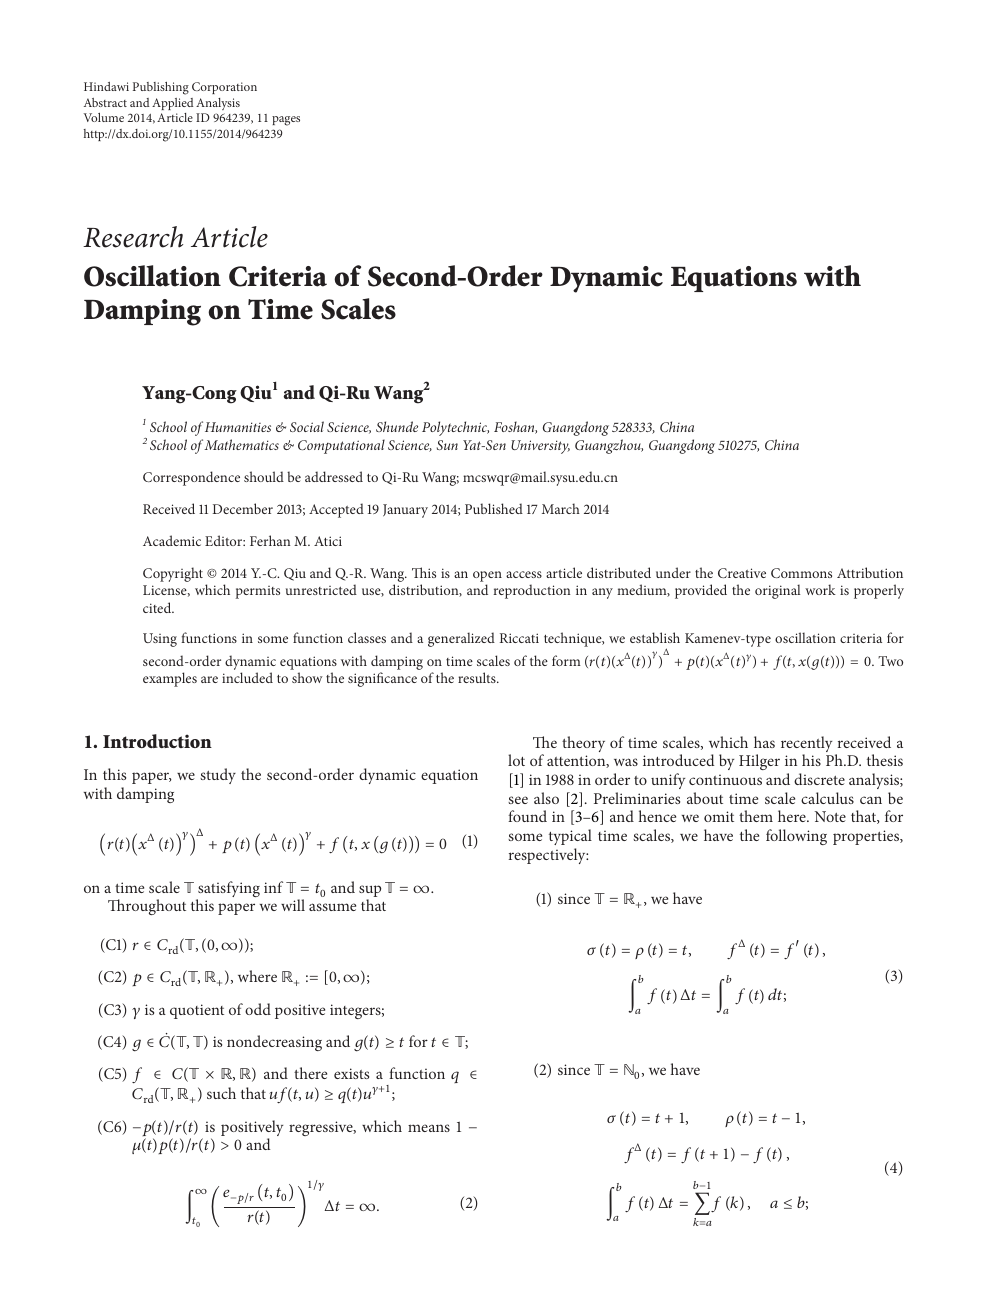 Oscillation Criteria Of Second Order Dynamic Equations With Damping On Time Scales Topic Of Research Paper In Mathematics Download Scholarly Article Pdf And Read For Free On Cyberleninka Open Science Hub